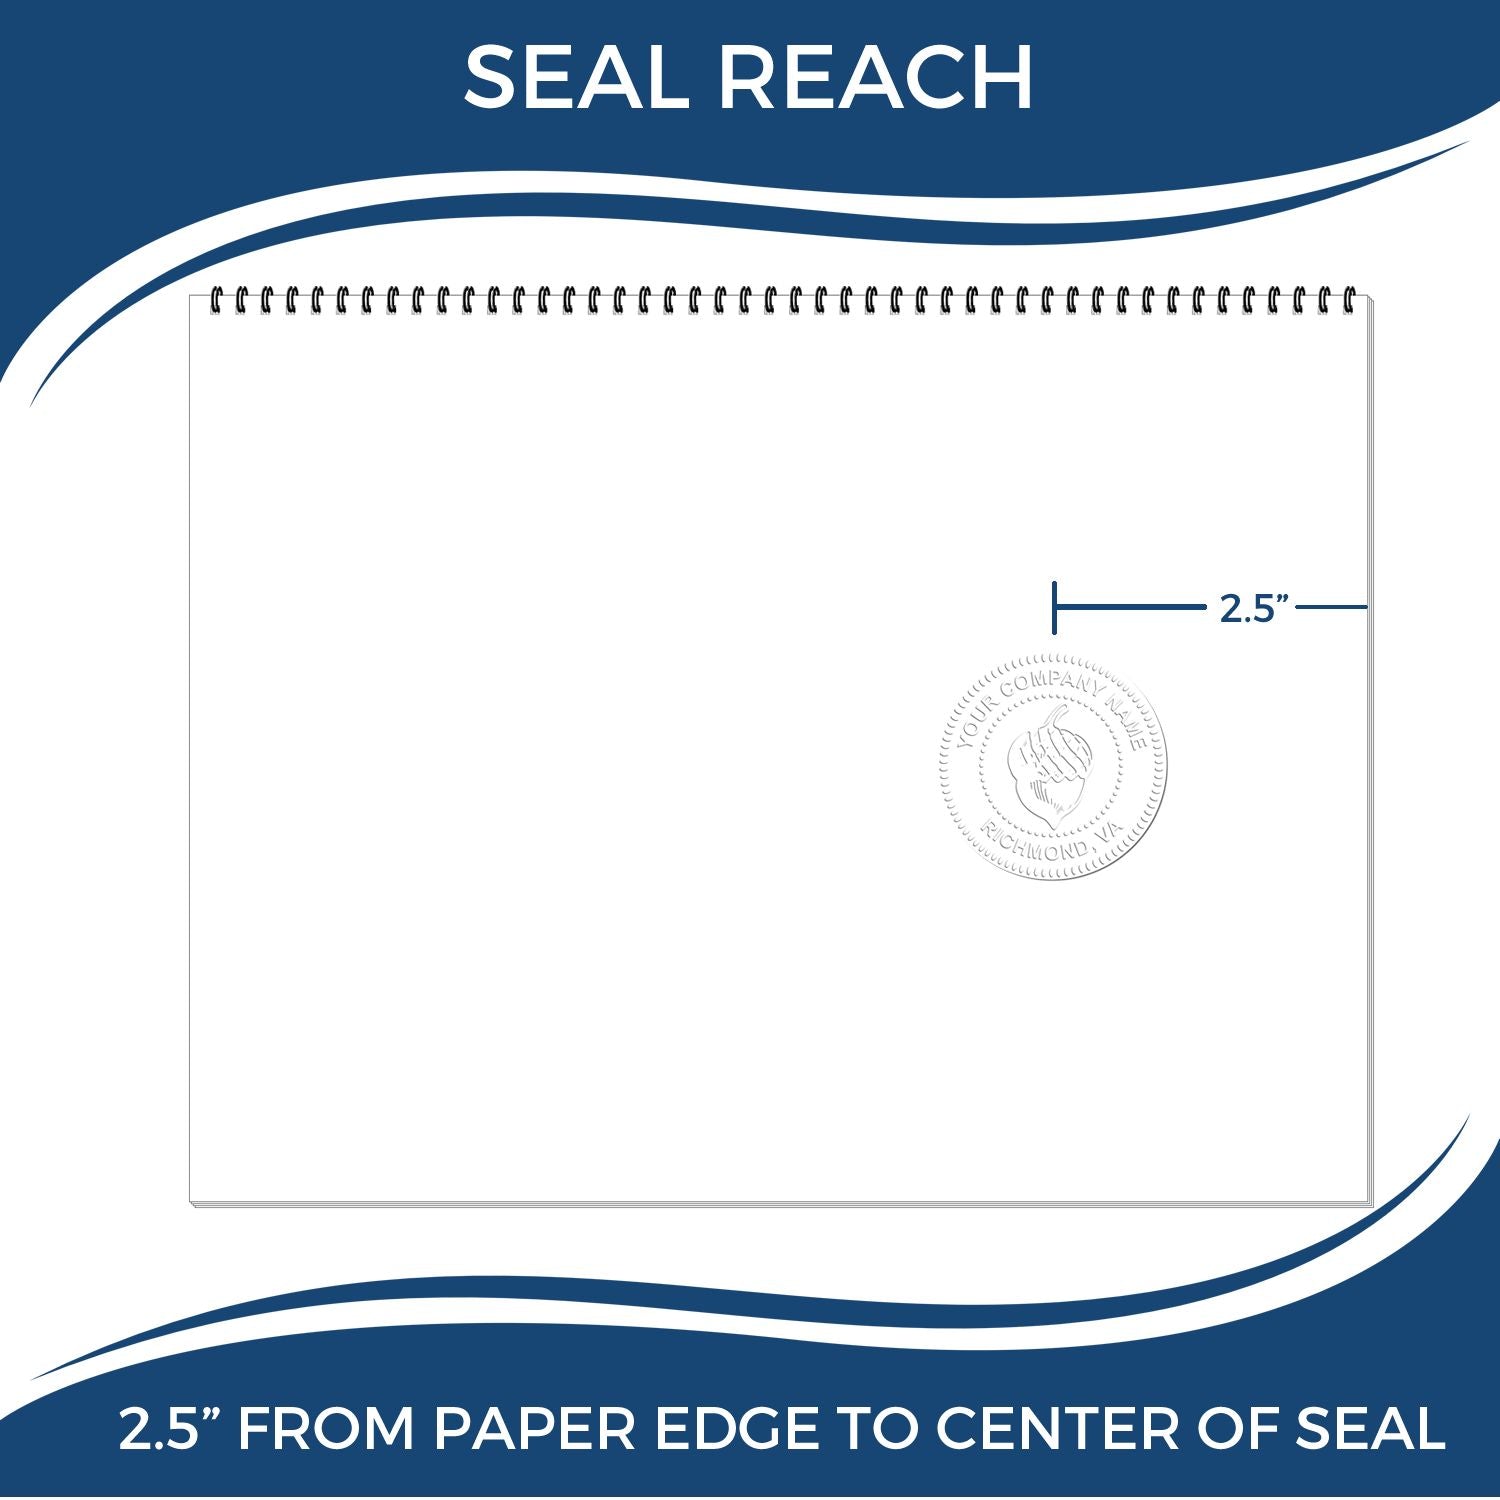 An infographic showing the seal reach which is represented by a ruler and a miniature seal image of the Heavy Duty Cast Iron Michigan Architect Embosser